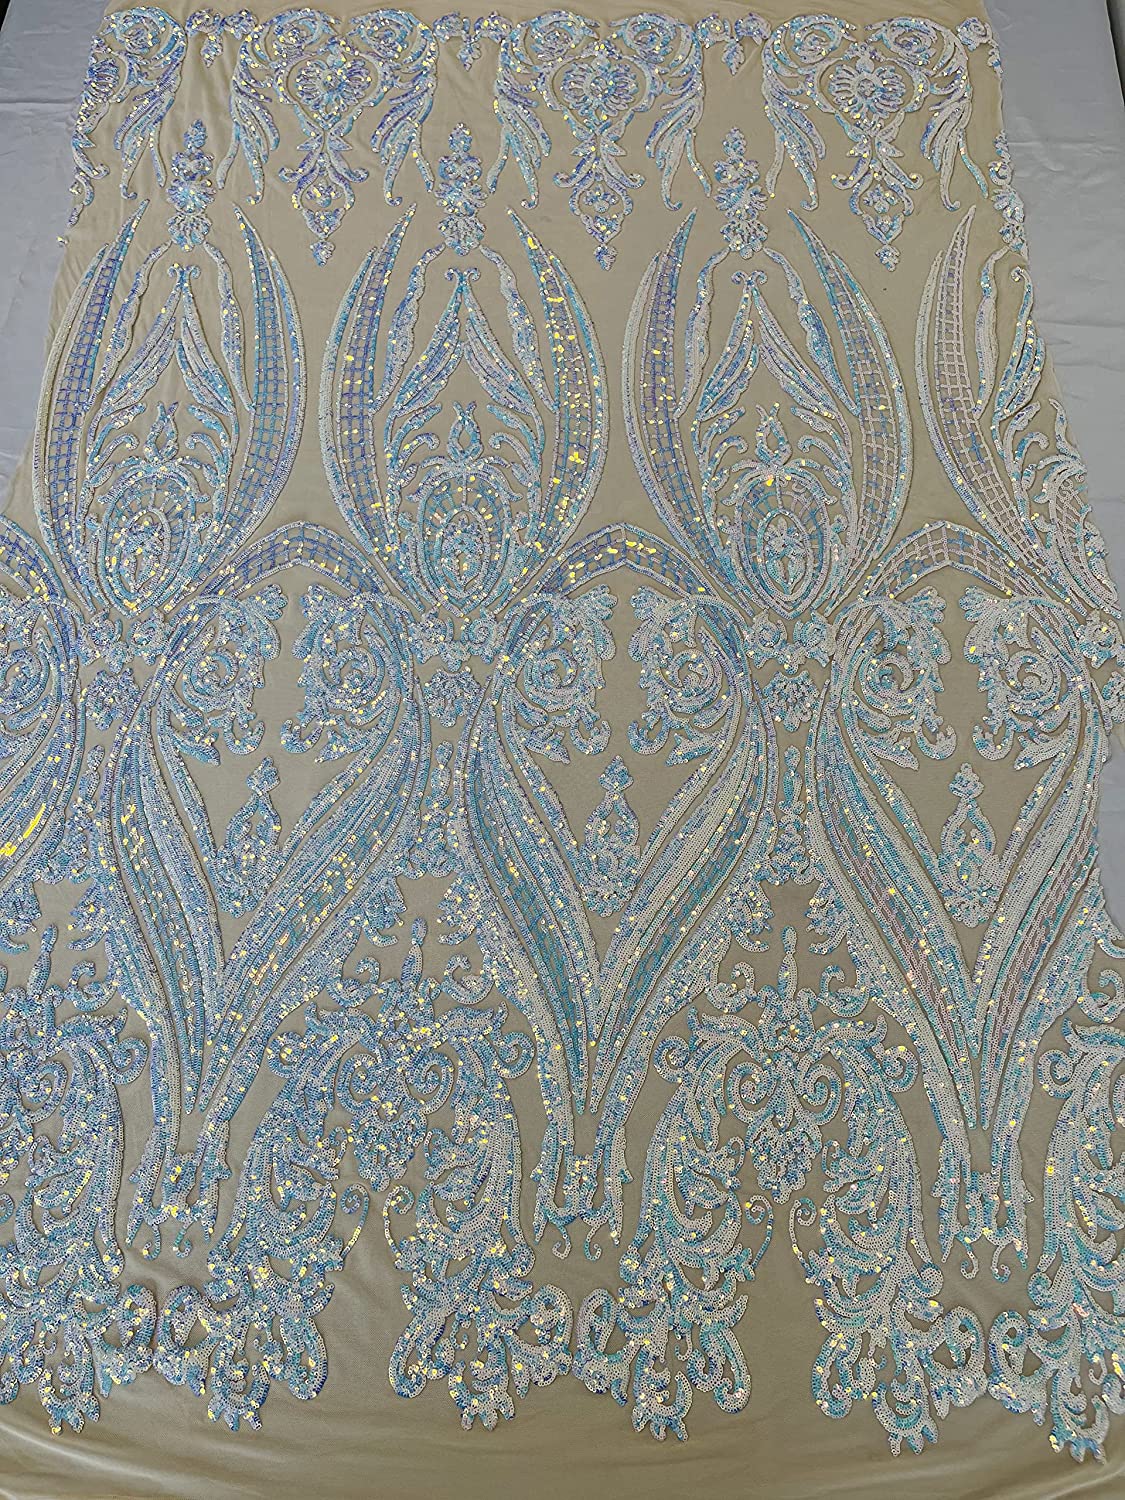 Empire Damask Design with Sequins Embroider On A 4 Way Stretch Mesh Fabric (1 Yard, Clear Aqua Iridescent on Light Nude Mesh)